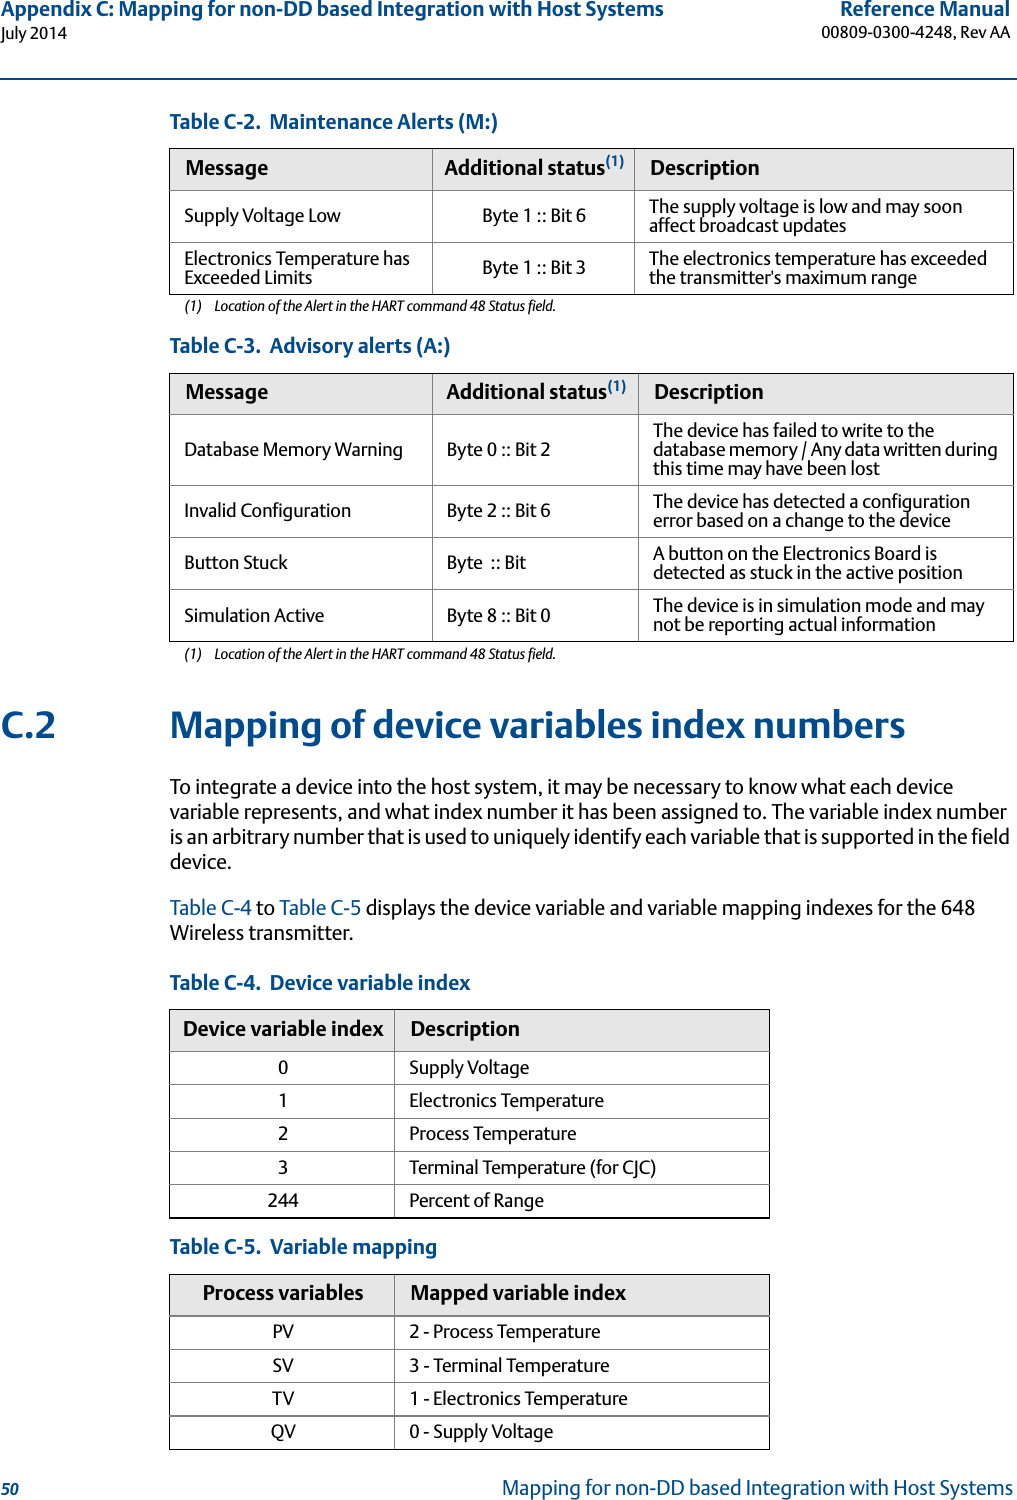 50Reference Manual00809-0300-4248, Rev AAAppendix C: Mapping for non-DD based Integration with Host SystemsJuly 2014Mapping for non-DD based Integration with Host SystemsC.2 Mapping of device variables index numbersTo integrate a device into the host system, it may be necessary to know what each device variable represents, and what index number it has been assigned to. The variable index number is an arbitrary number that is used to uniquely identify each variable that is supported in the field device.Table C-4 to Table C-5 displays the device variable and variable mapping indexes for the 648 Wireless transmitter.Supply Voltage Low Byte 1 :: Bit 6 The supply voltage is low and may soon affect broadcast updatesElectronics Temperature has Exceeded Limits Byte 1 :: Bit 3 The electronics temperature has exceeded the transmitter&apos;s maximum range(1) Location of the Alert in the HART command 48 Status field.Table C-3.  Advisory alerts (A:)Message Additional status(1)(1) Location of the Alert in the HART command 48 Status field.DescriptionDatabase Memory Warning Byte 0 :: Bit 2 The device has failed to write to the database memory / Any data written during this time may have been lostInvalid Configuration Byte 2 :: Bit 6 The device has detected a configuration error based on a change to the deviceButton Stuck Byte  :: Bit  A button on the Electronics Board is detected as stuck in the active positionSimulation Active Byte 8 :: Bit 0 The device is in simulation mode and may not be reporting actual informationTable C-4.  Device variable indexDevice variable index Description0Supply Voltage1Electronics Temperature2Process Temperature3Terminal Temperature (for CJC)244 Percent of RangeTable C-5.  Variable mappingProcess variables Mapped variable indexPV 2 - Process TemperatureSV 3 - Terminal TemperatureTV 1 - Electronics TemperatureQV 0 - Supply VoltageTable C-2.  Maintenance Alerts (M:)Message Additional status(1) Description